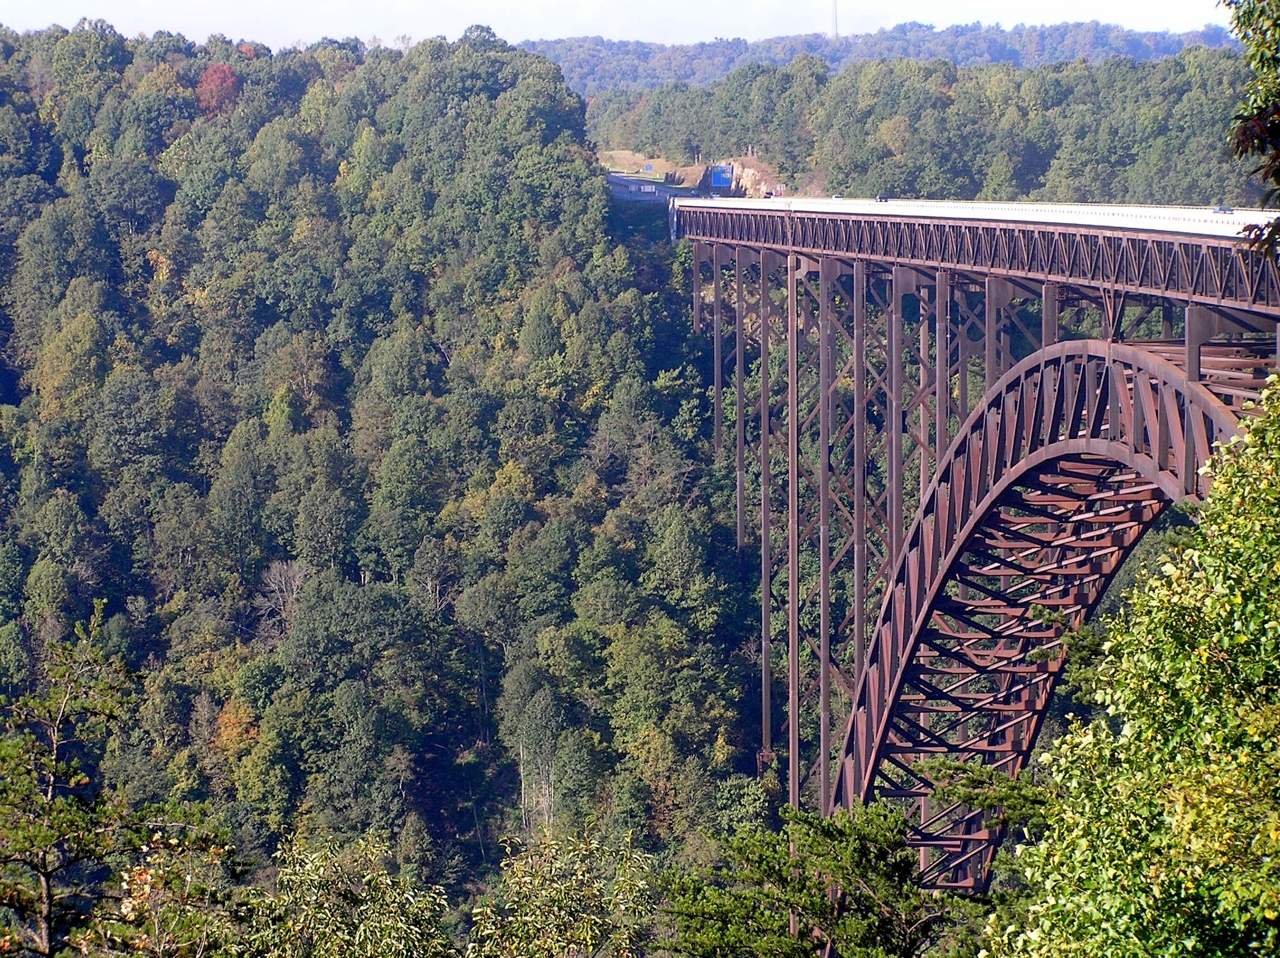 New River Gorge Bridge in West Virginia is 900 ft. above the river. © John Suddath